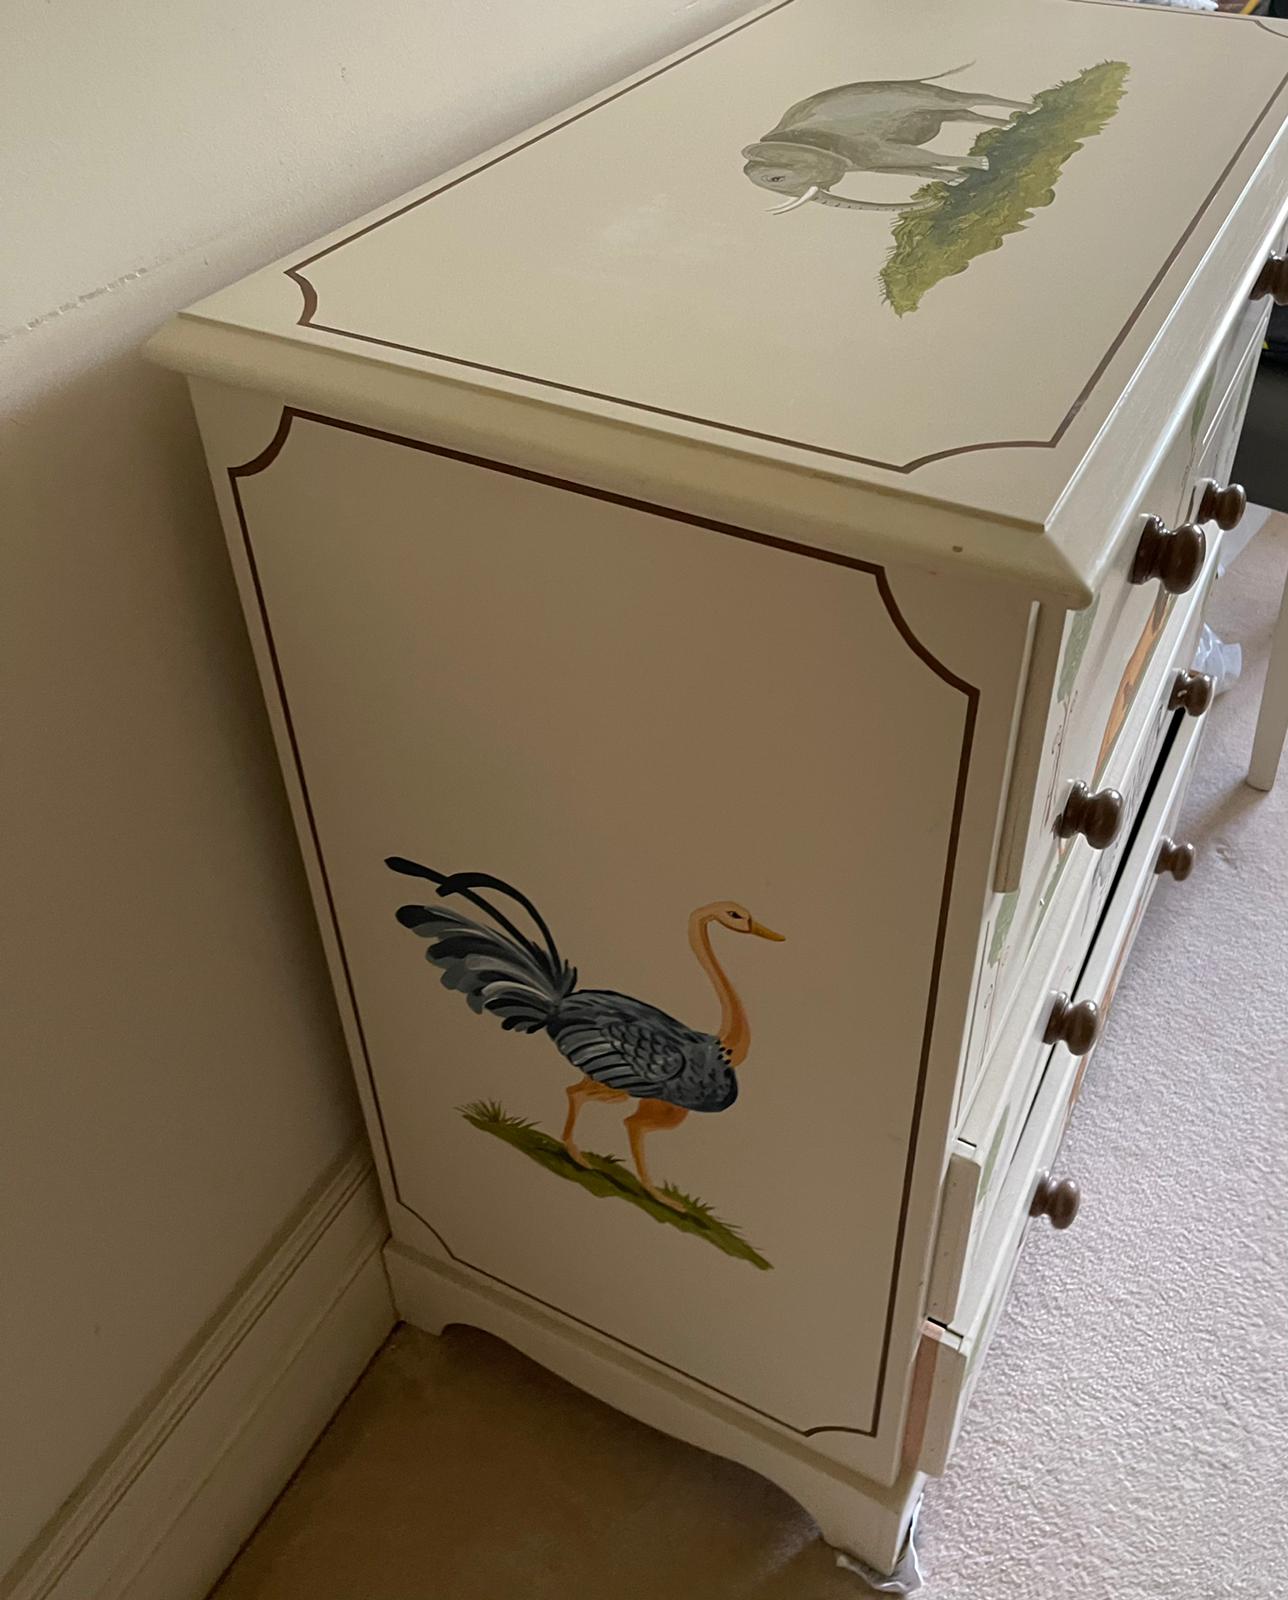 Dragons of Walton Street Classic Large Chest of Drawers Hand Painted Vintage Safari 85 cm x 45 cm - Image 2 of 3